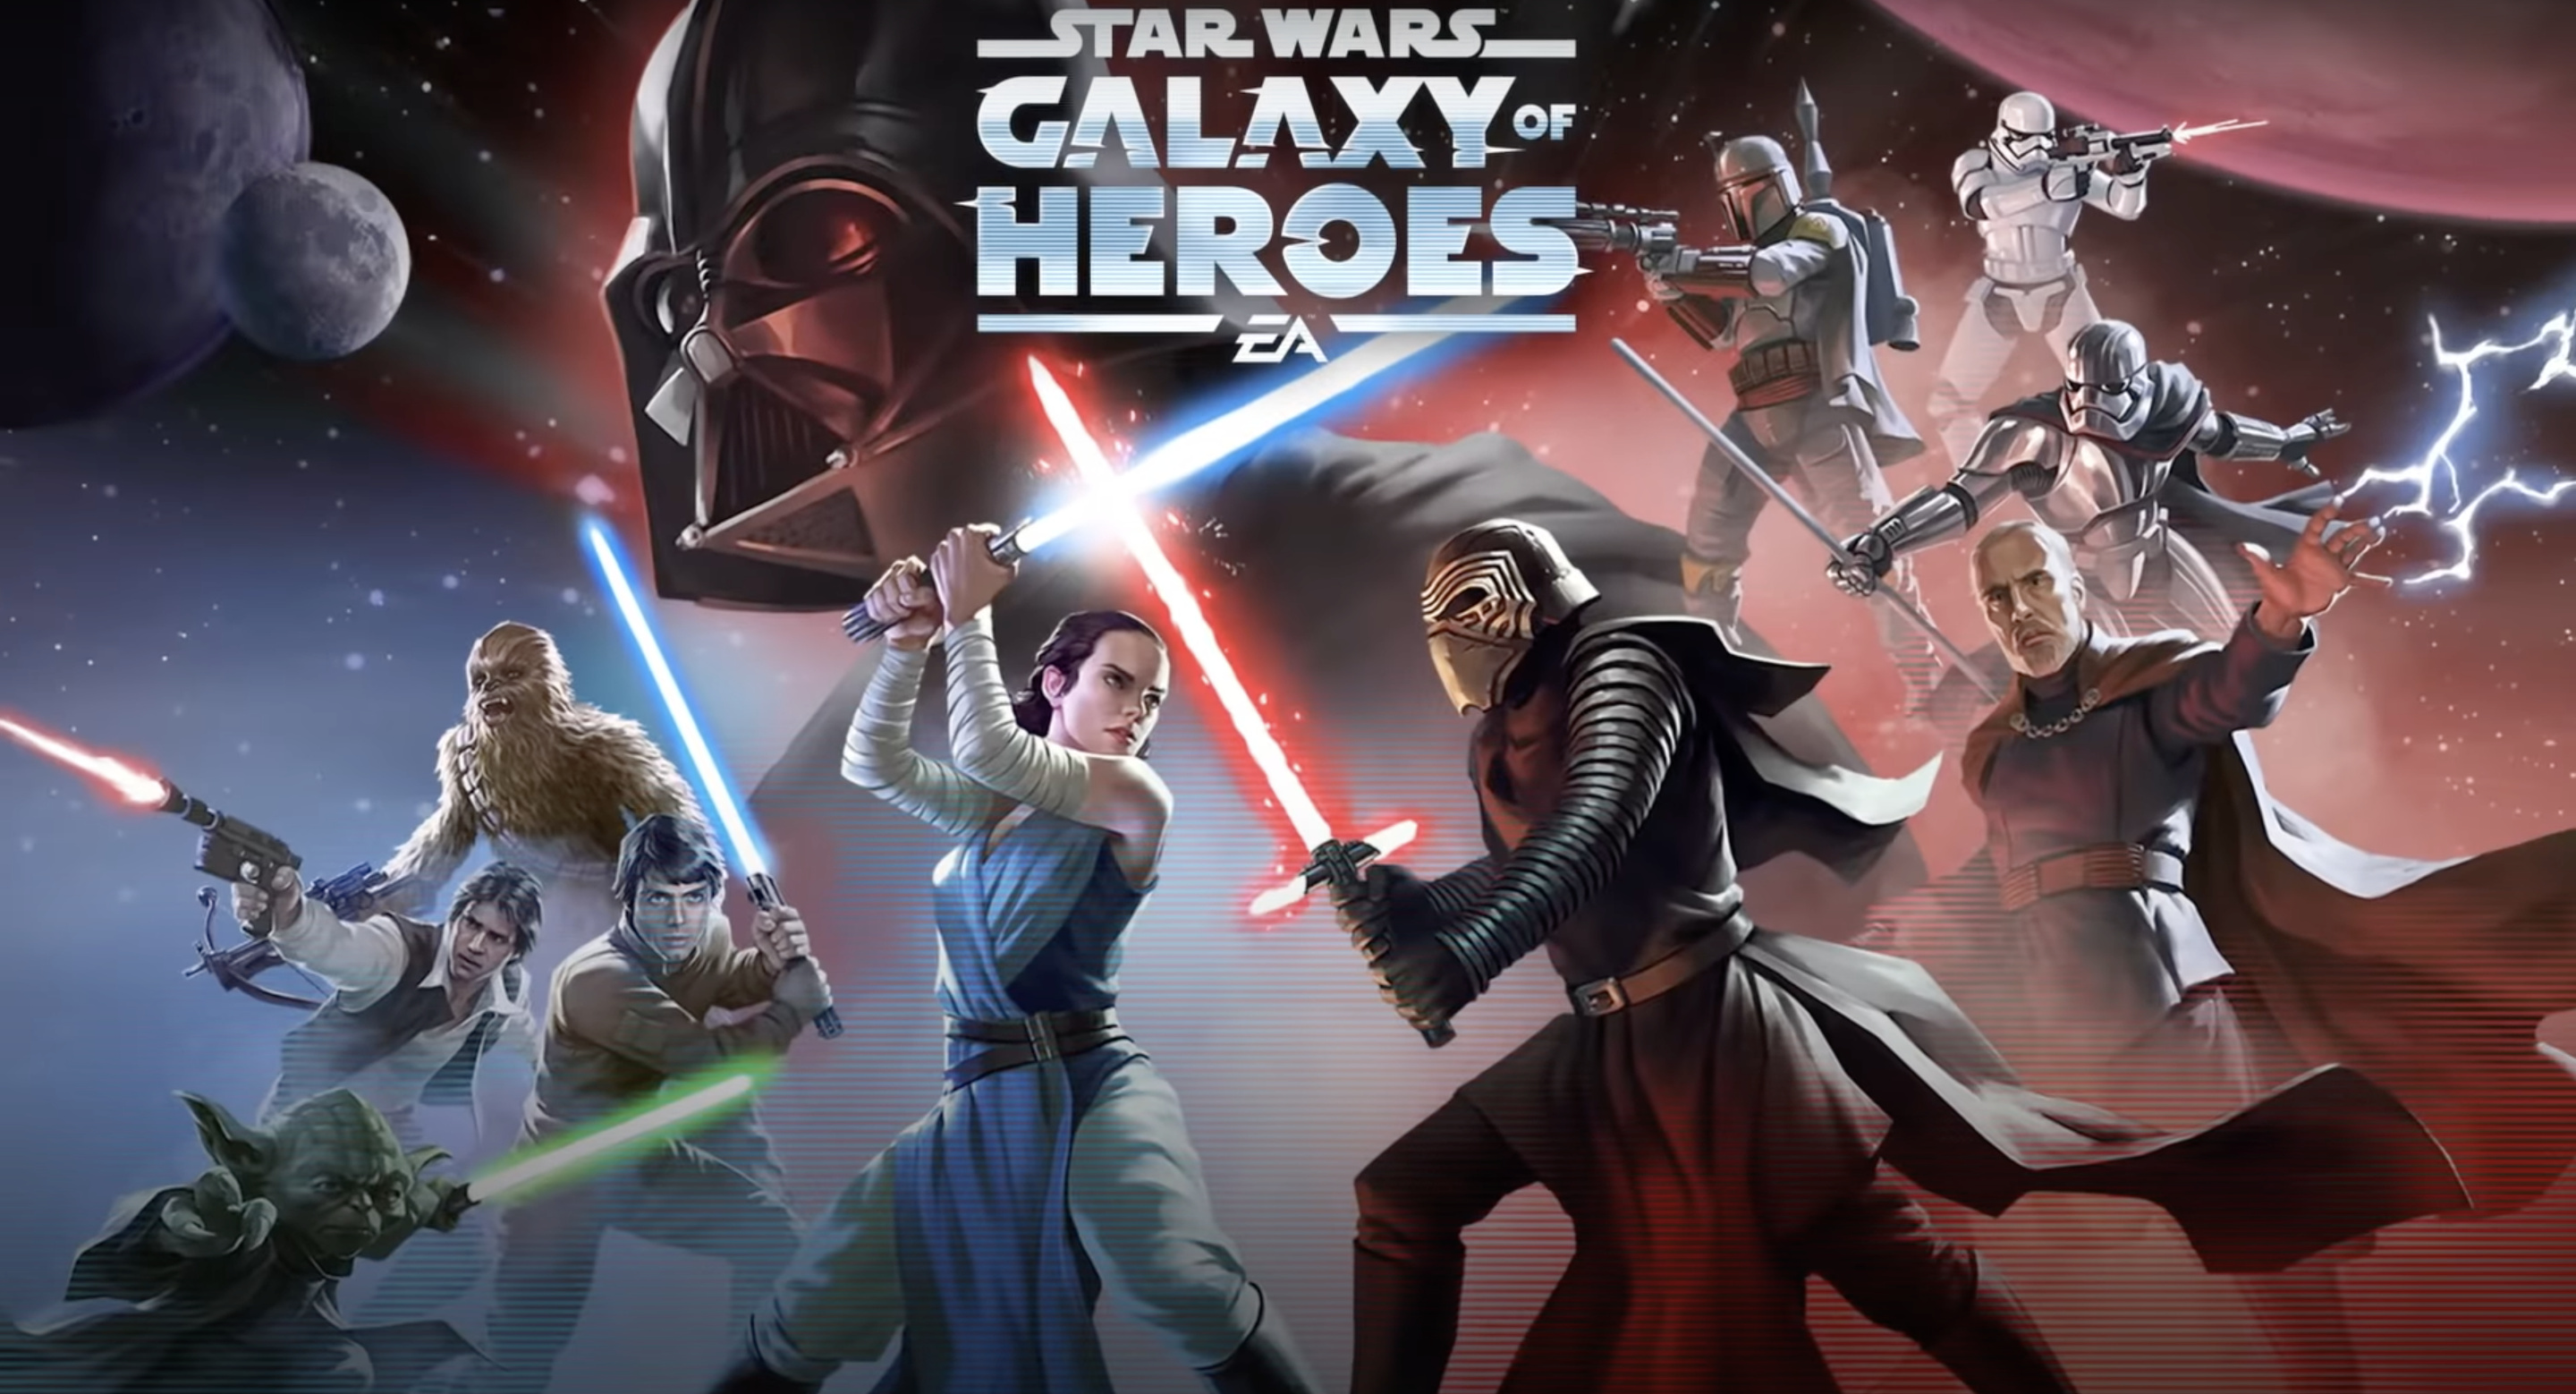 Star Wars: Galaxy of Heroes: The game allowing players to collect characters from the prequel trilogy, EA. 2880x1560 HD Background.